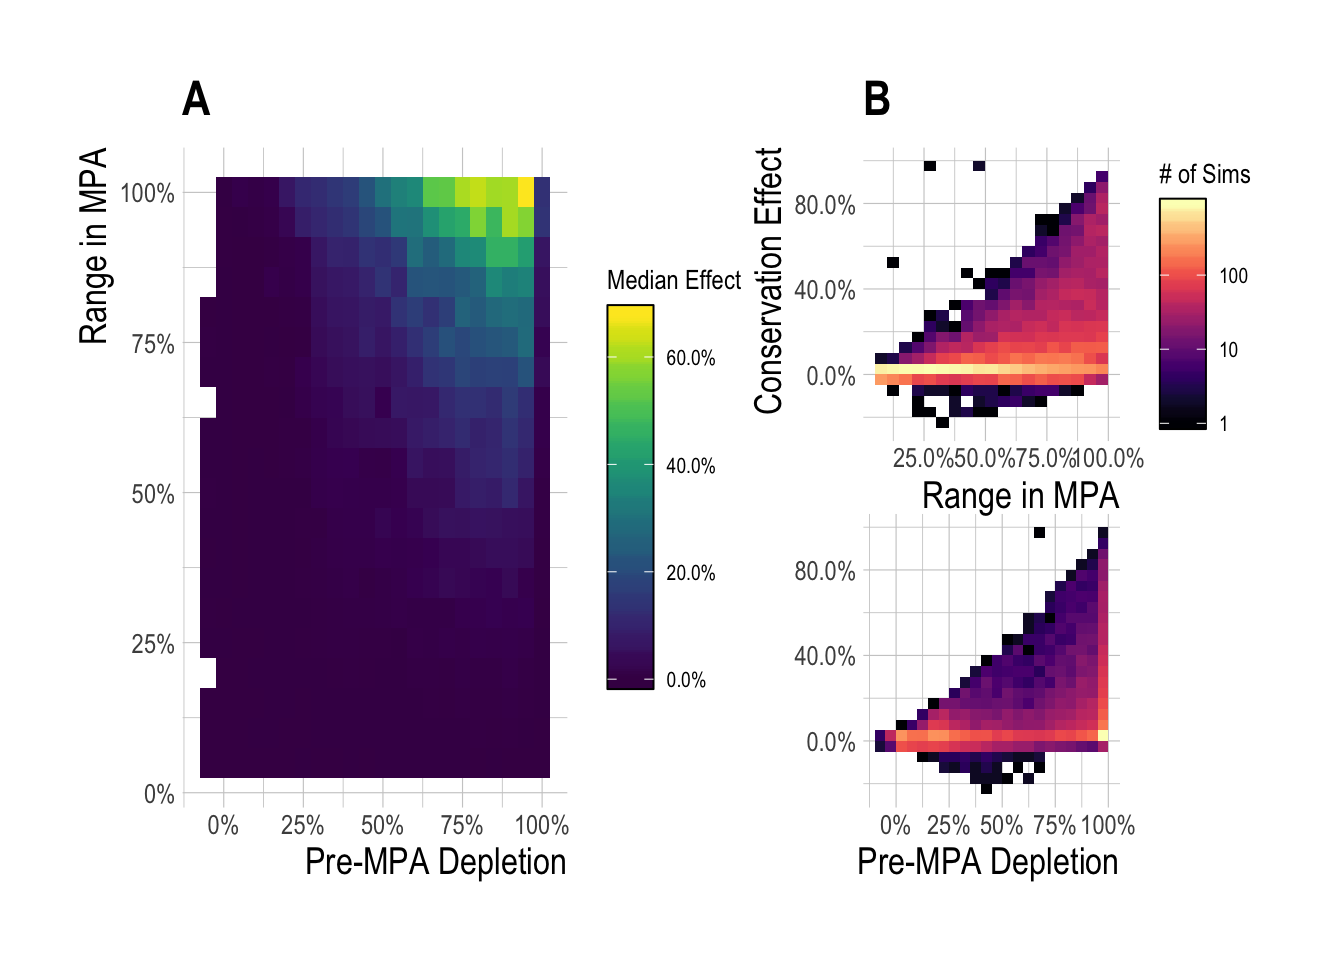 Median (A) and range (B) regional MPA conservation effect (expressed as percent of unfished biomass) after 15 years of protection across a range of pre-MPA depletions and MPA sizes